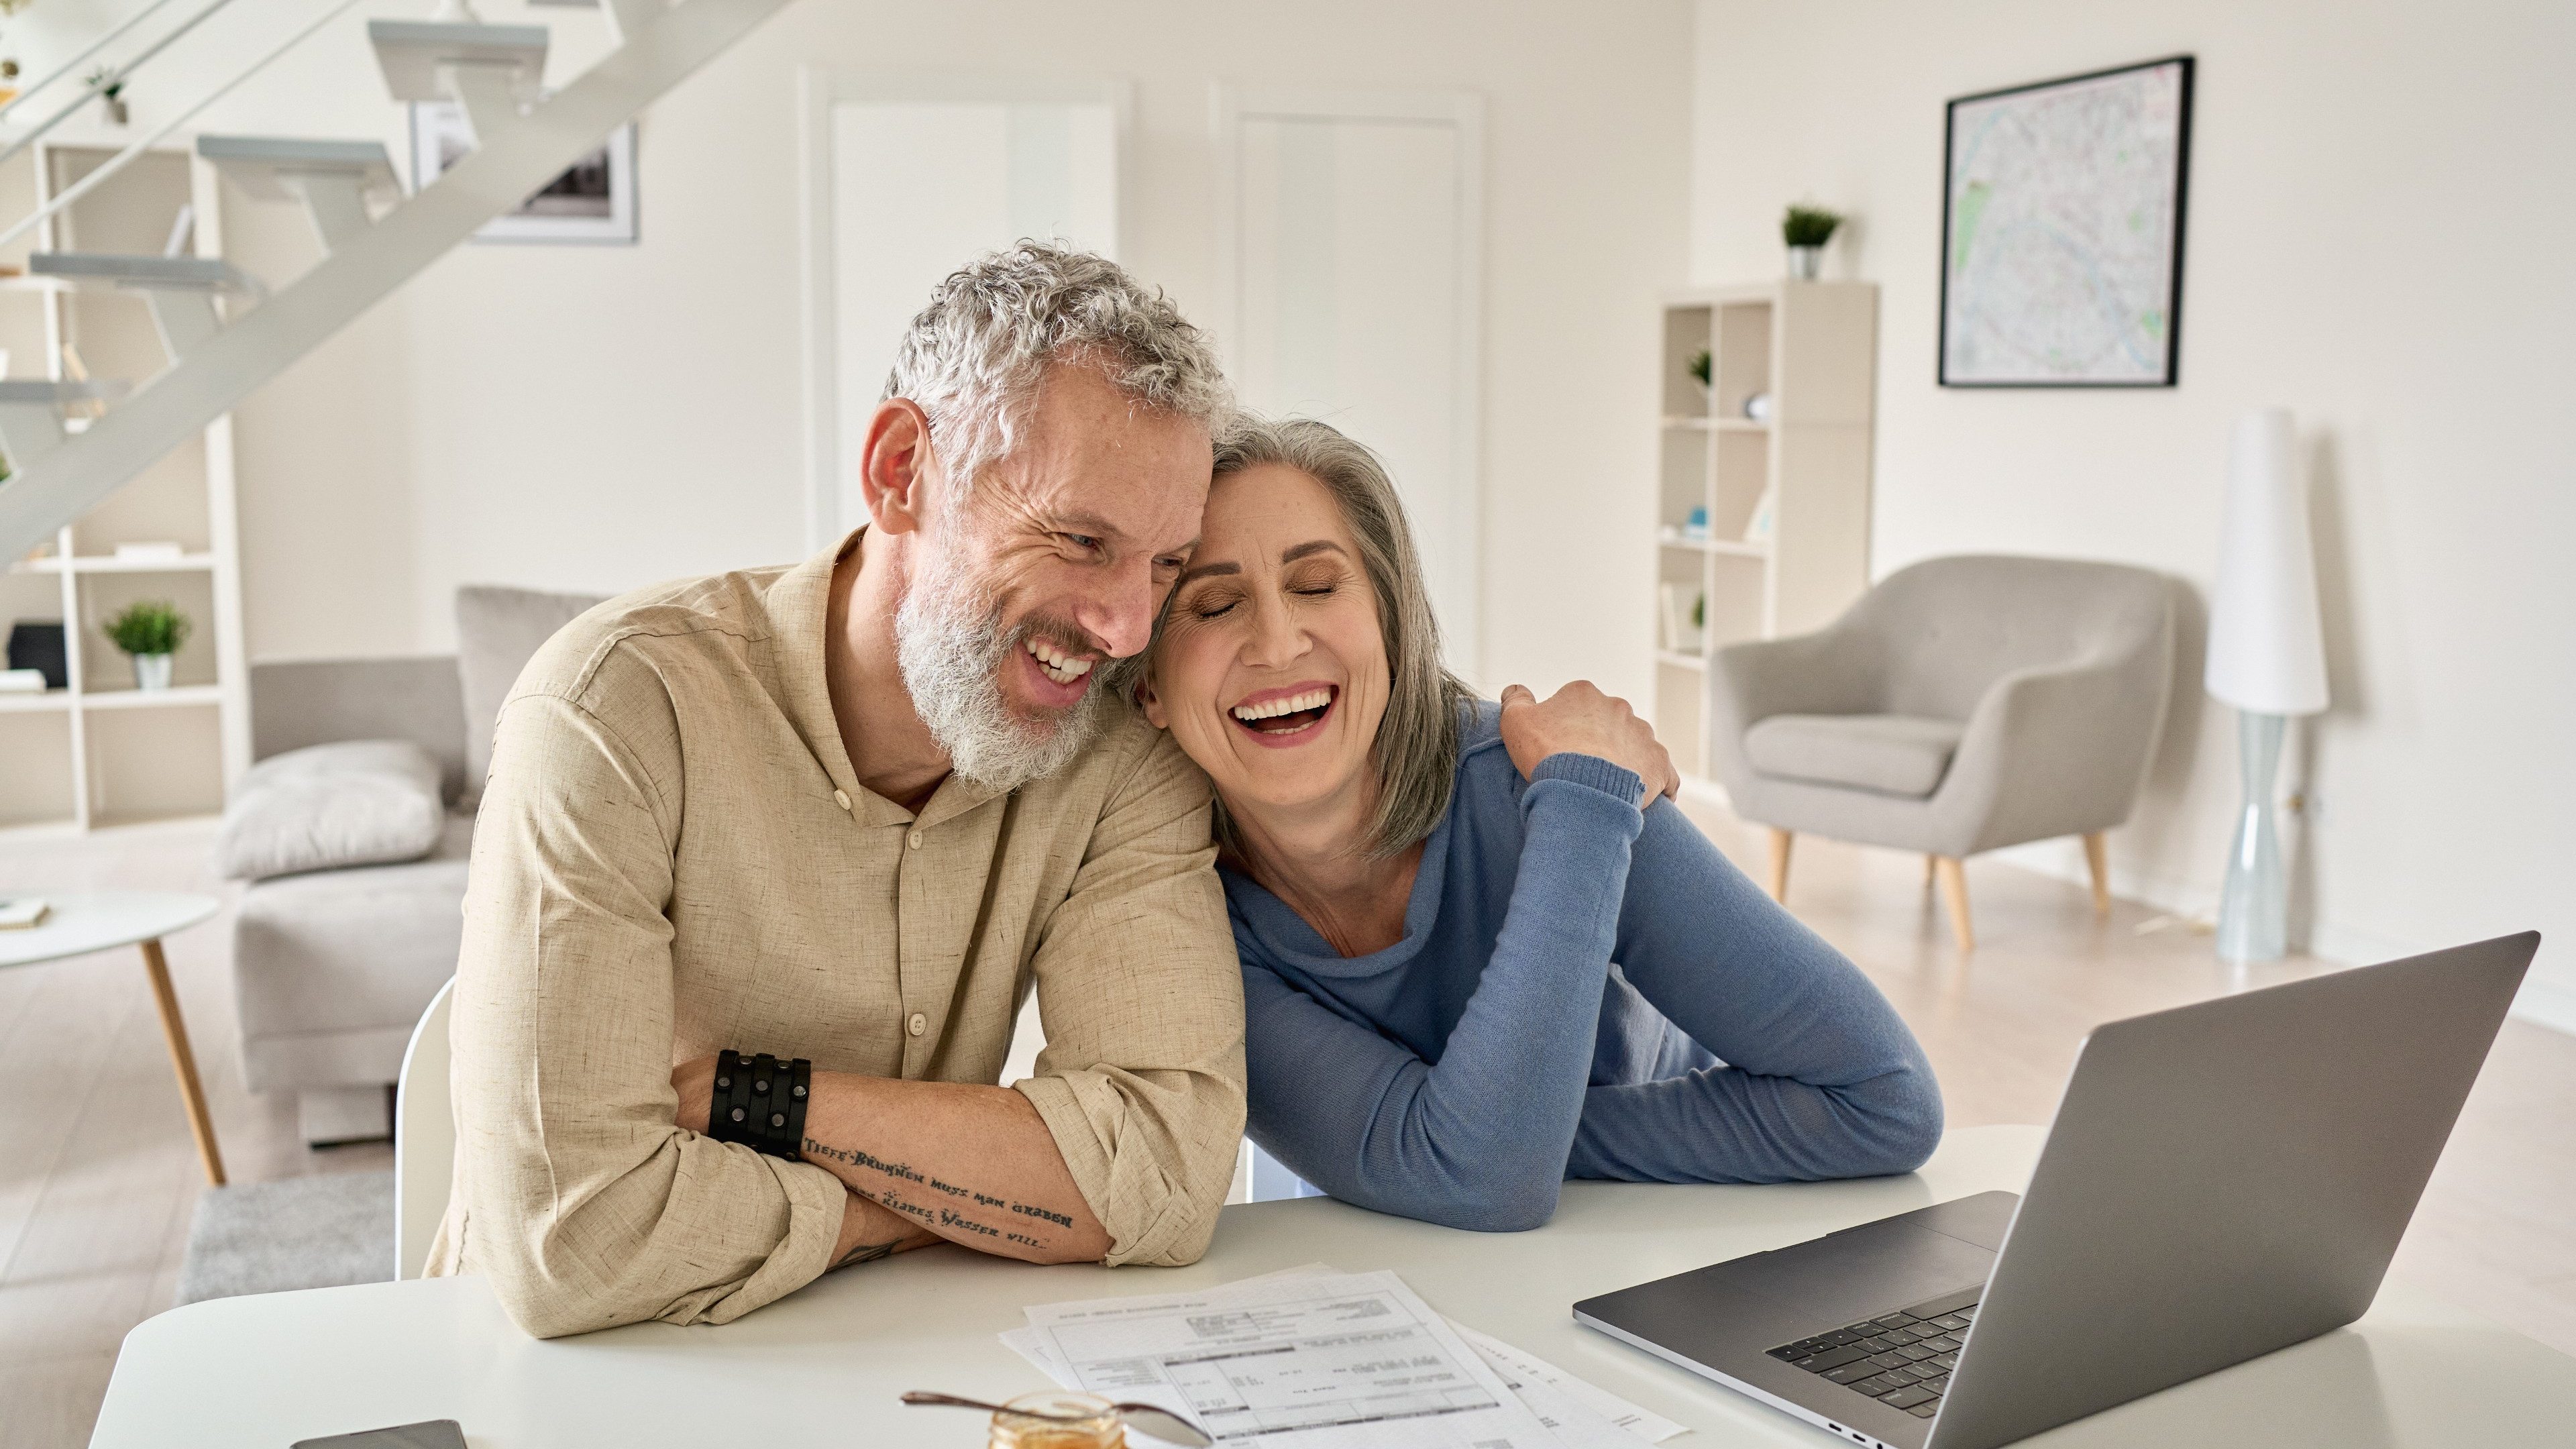 Happy mature older family couple laughing, bonding sitting at home table with laptop. Smiling middle aged senior 50s husband and wife having fun satisfied with buying insurance, paying bills online.